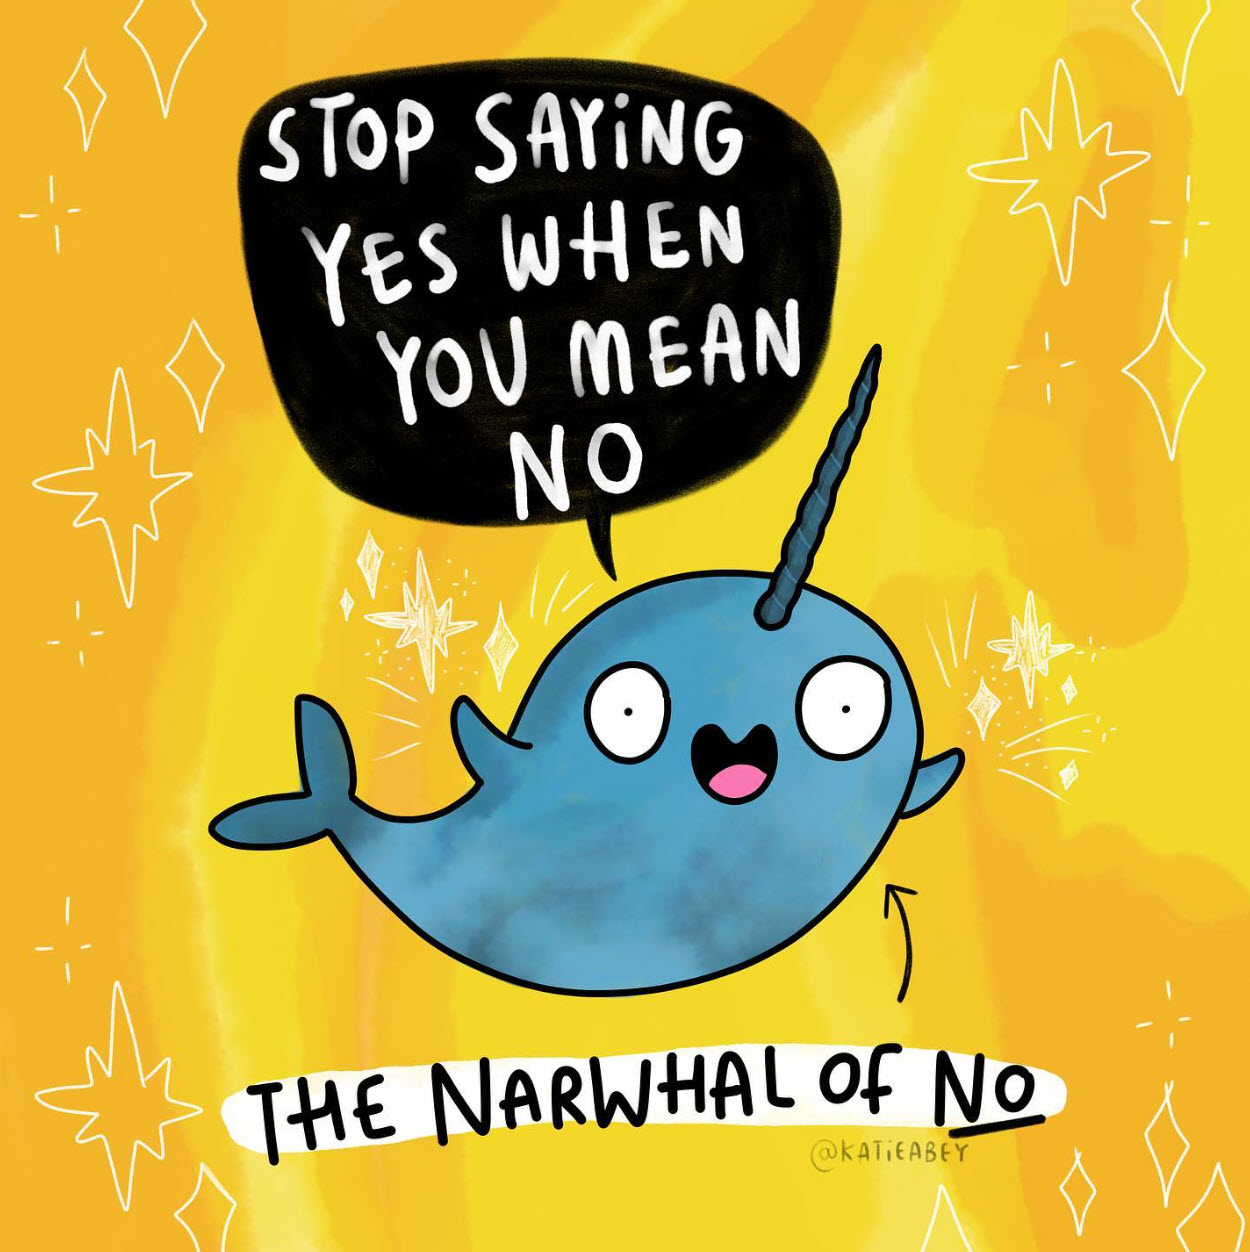 blue narwhal on yellow background saying 